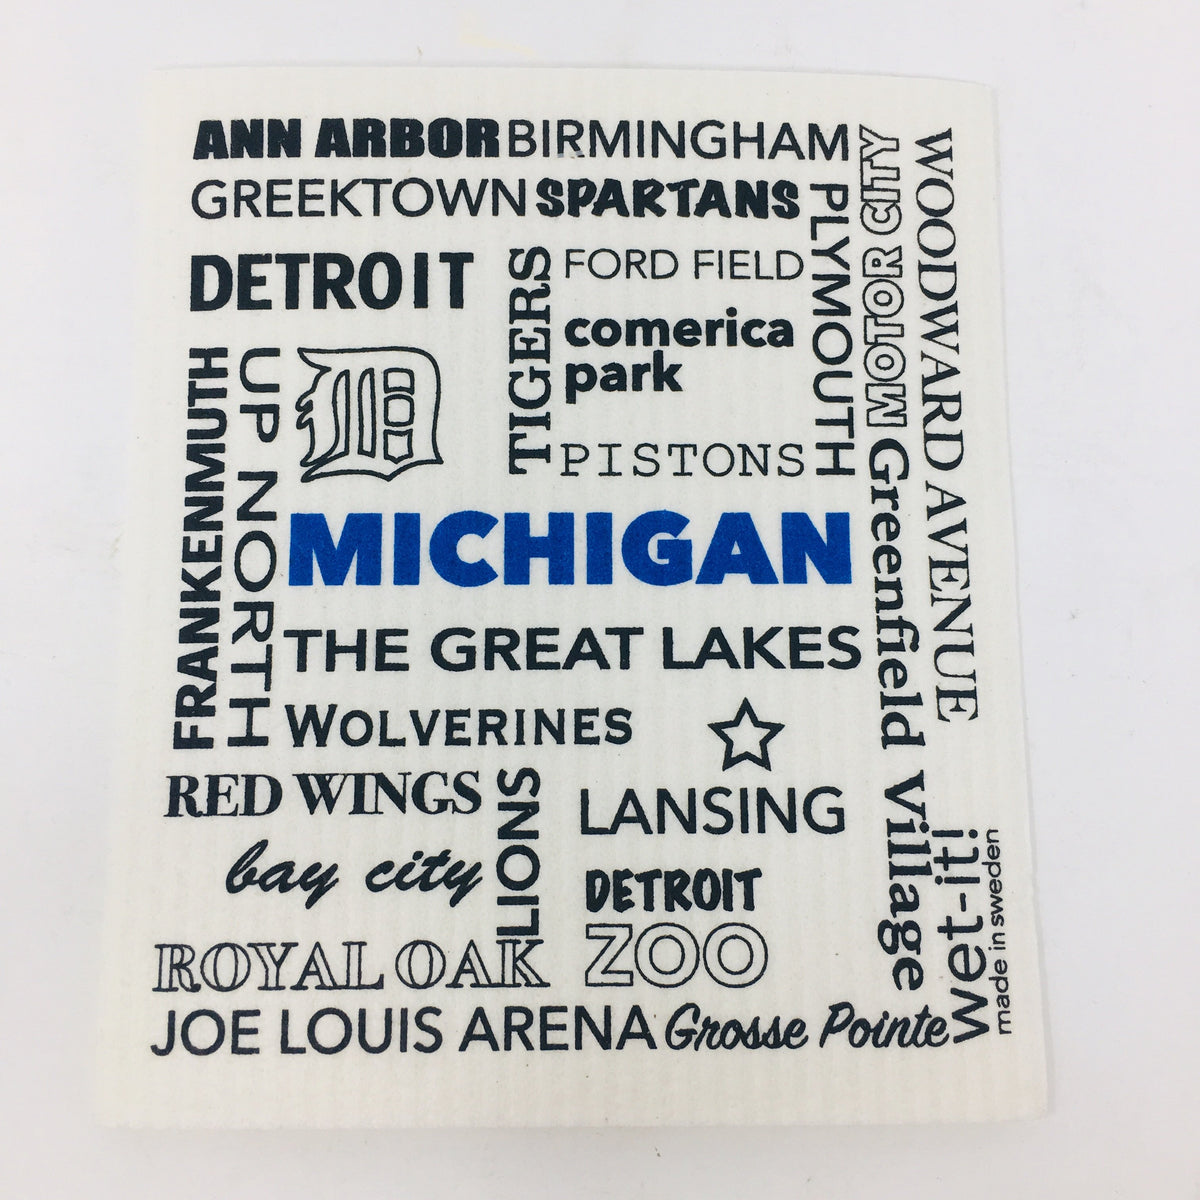 ivory colored rectangle shaped scrubbing pad with Michigan city names and attractions such as &quot;Frankenmuth, Ann Arbor, Joe Louis Arena, The Great Lakes, Motor City&quot; printed all over it in black and &quot;Michigan&quot; printed in blue on it